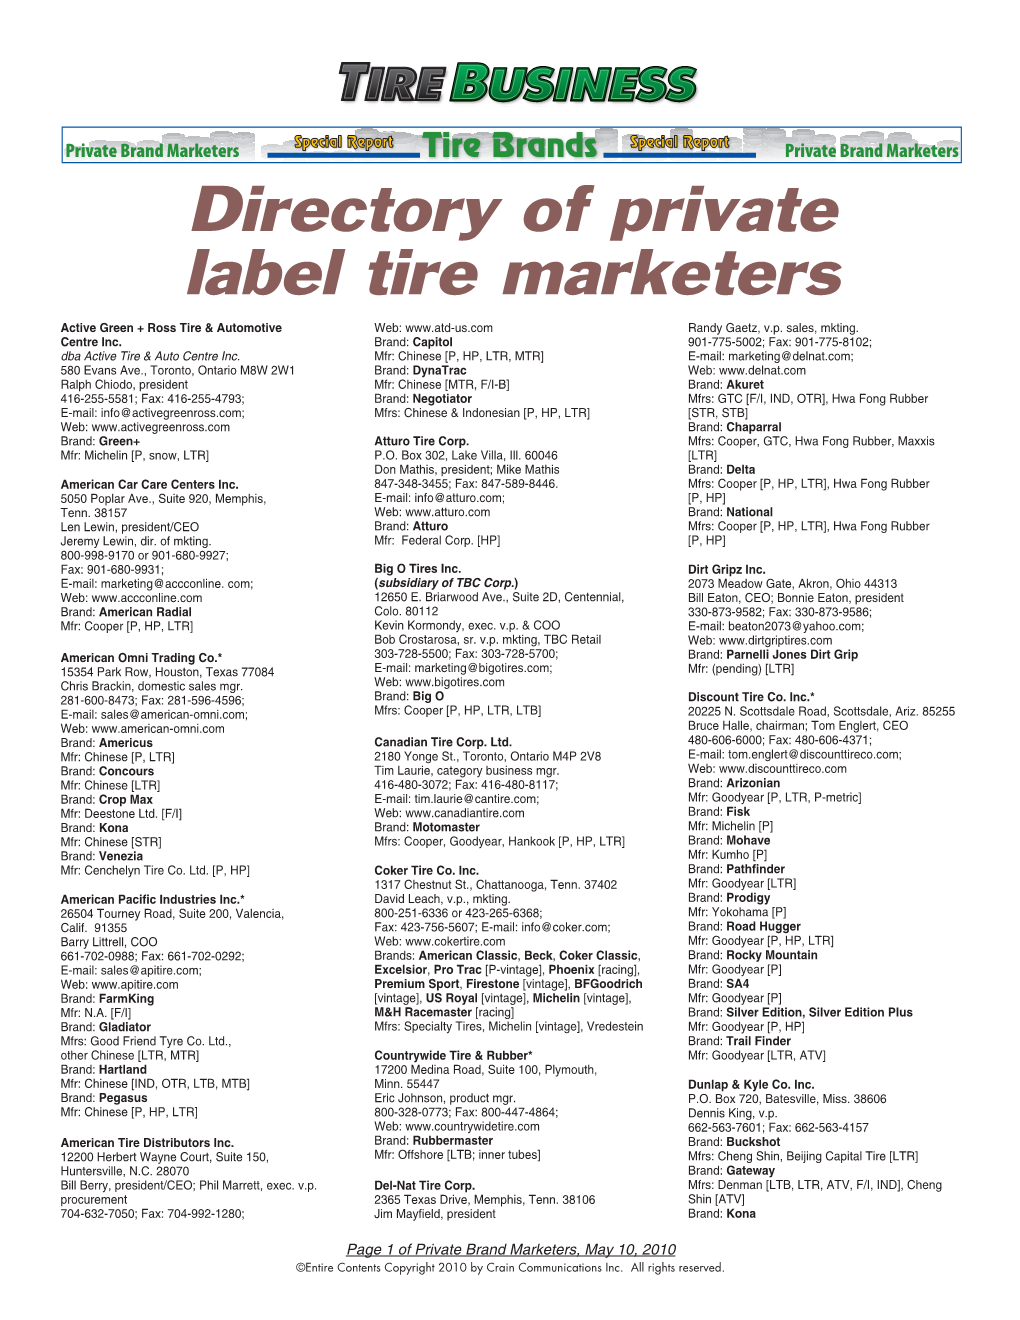 Directory of Private Label Tire Marketers